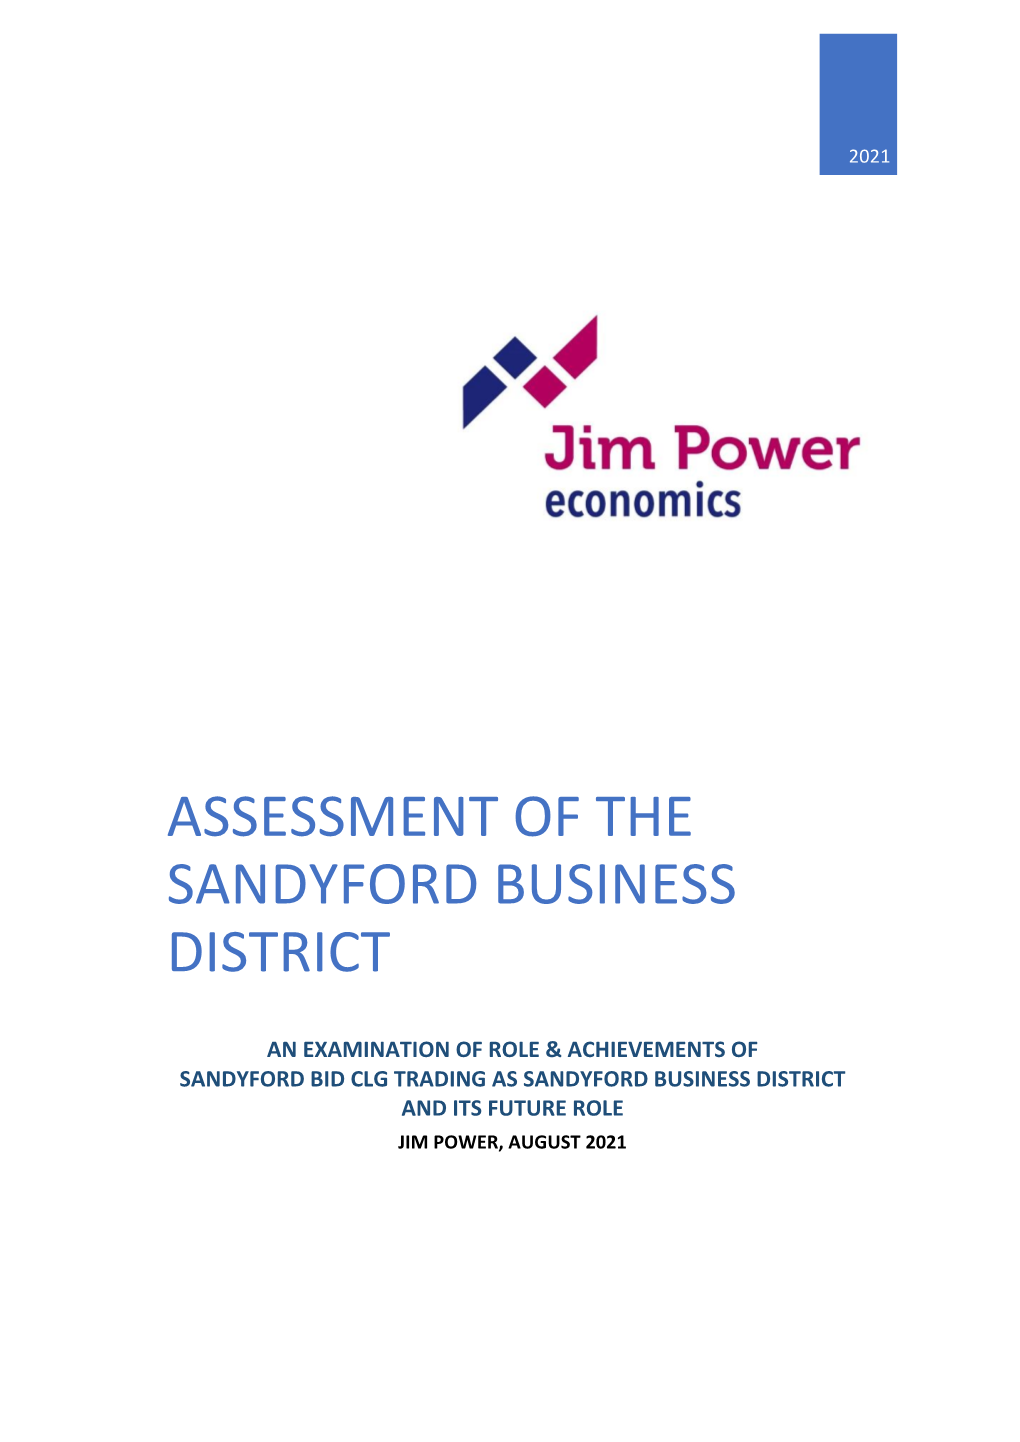 Assessment of the Sandyford Business District